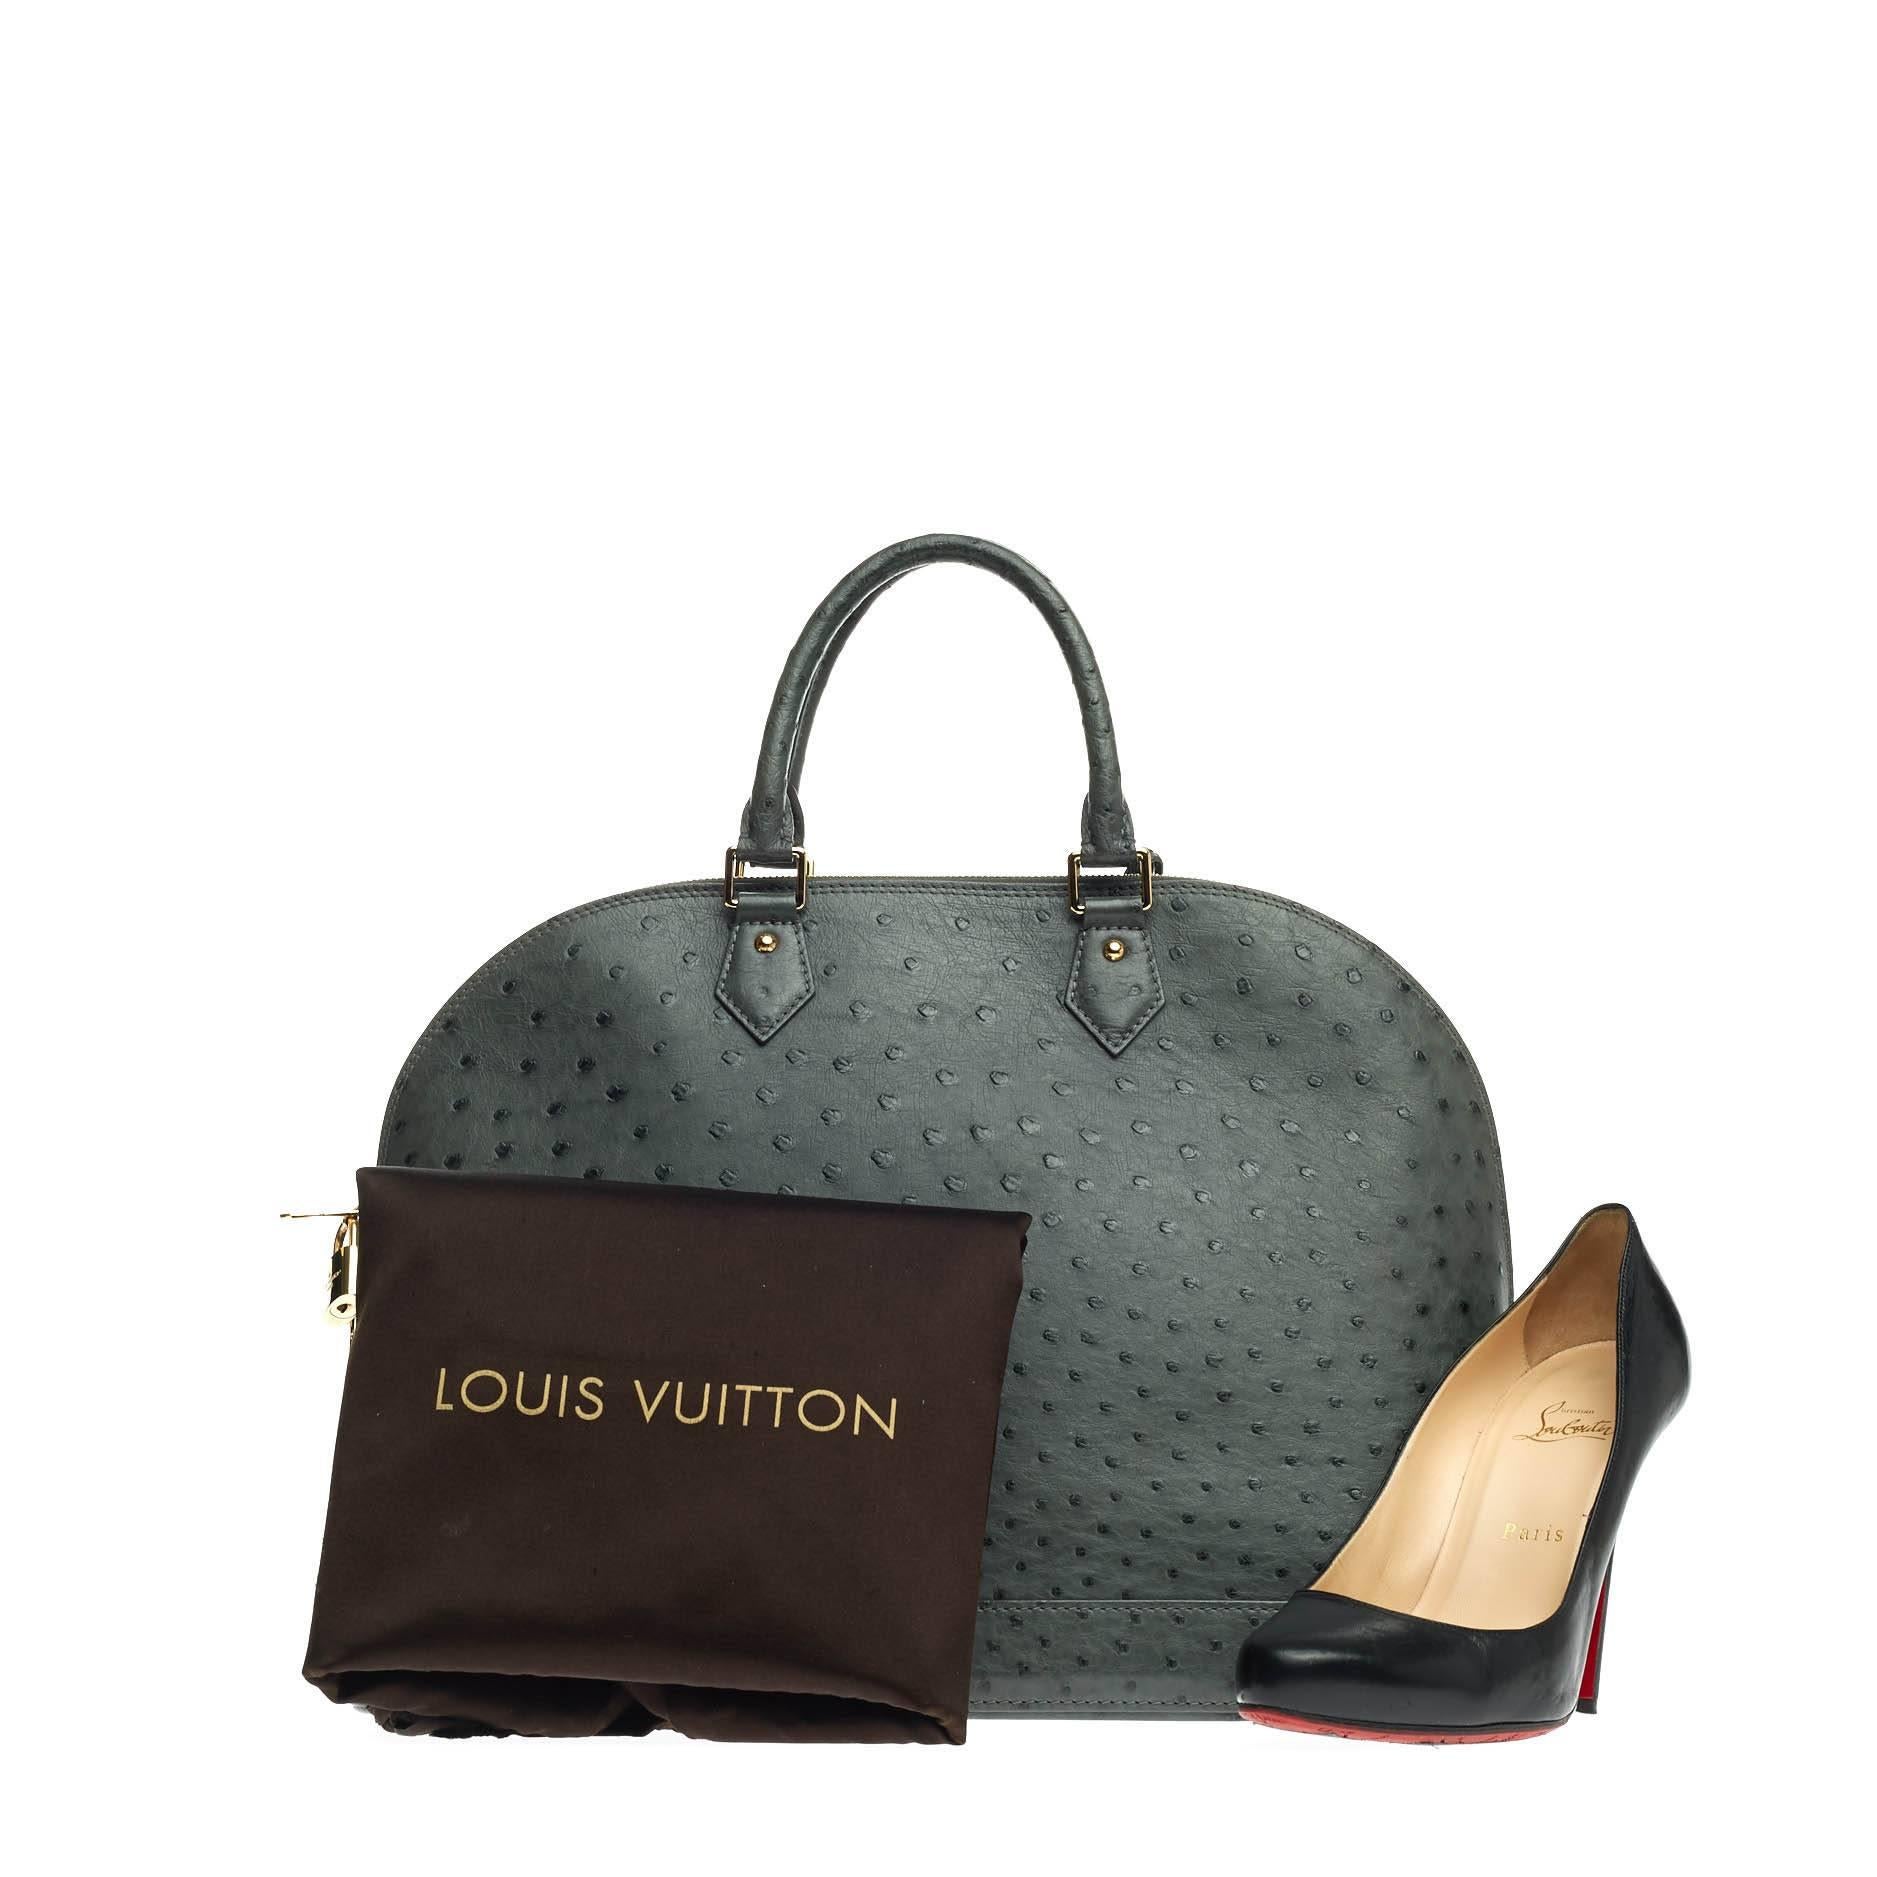 This authentic Louis Vuitton Alma Ostrich GM is a timeless piece made for anyone with impeccable taste. Crafted from genuine gris grey ostrich skin, this dome-like bag features dual-rolled ostrich leather handles, protective base stud and gold-tone